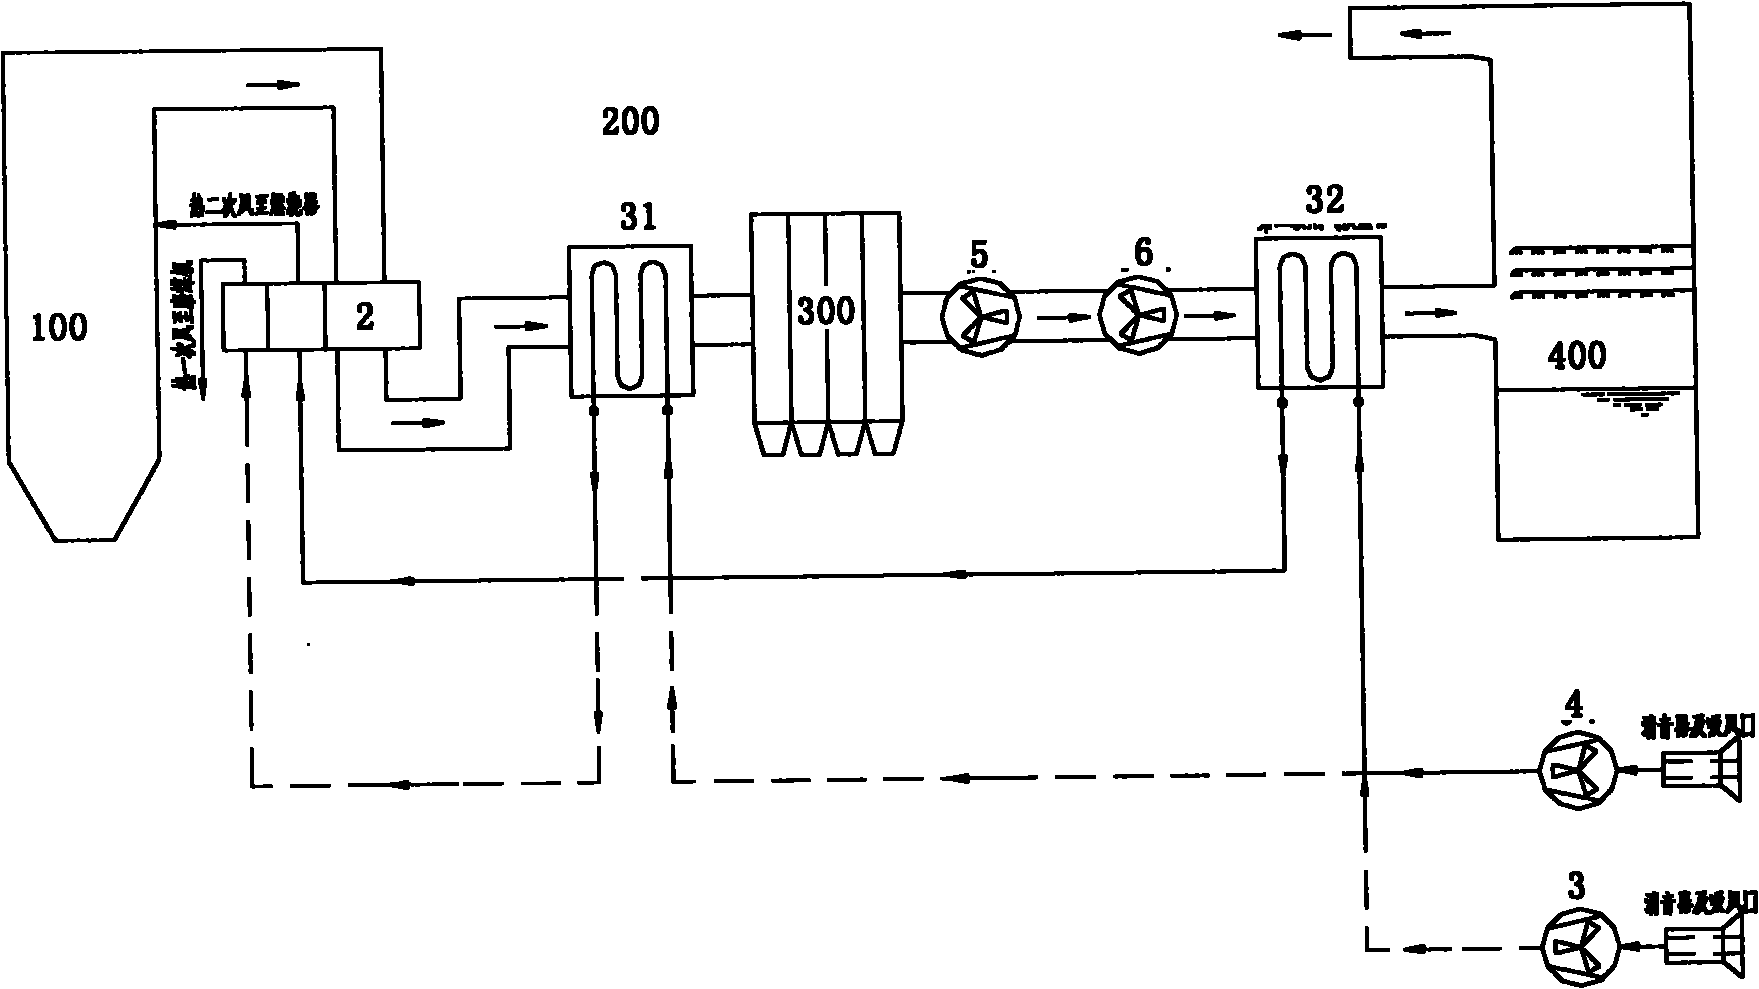 Two-stage smoke-gas-air heat-exchanger system applied to thermal power plant